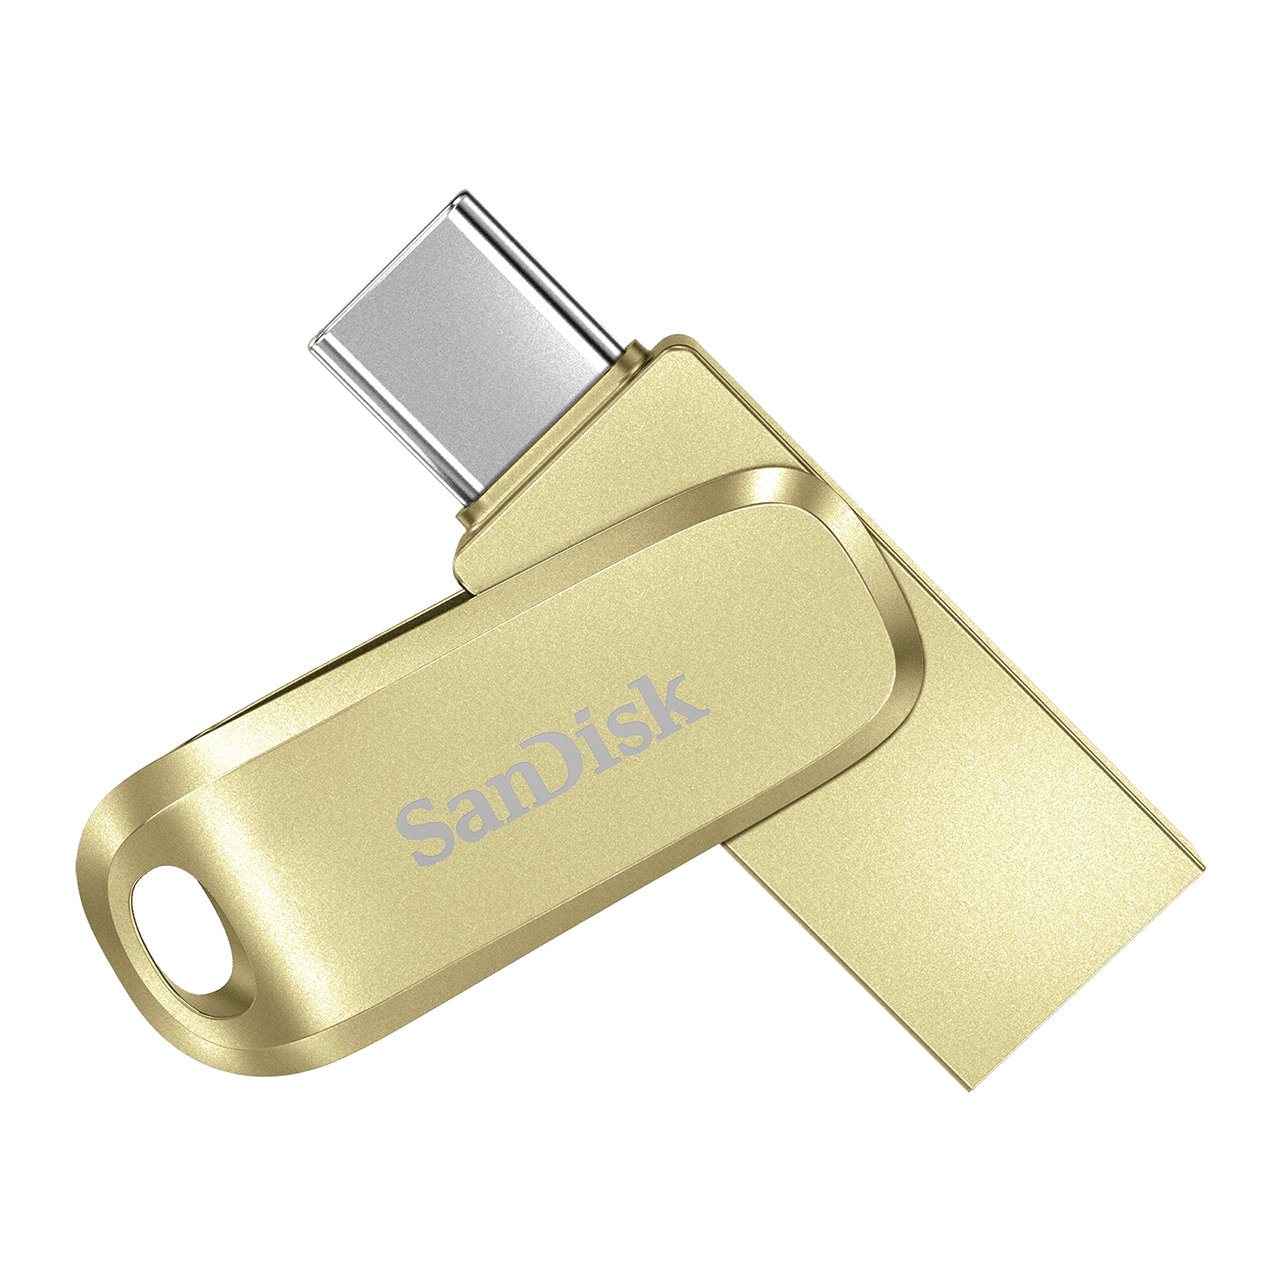 SanDisk Ultra Dual Drive Luxe USB Type-C Flash Drive - 128GB Gold - Image4